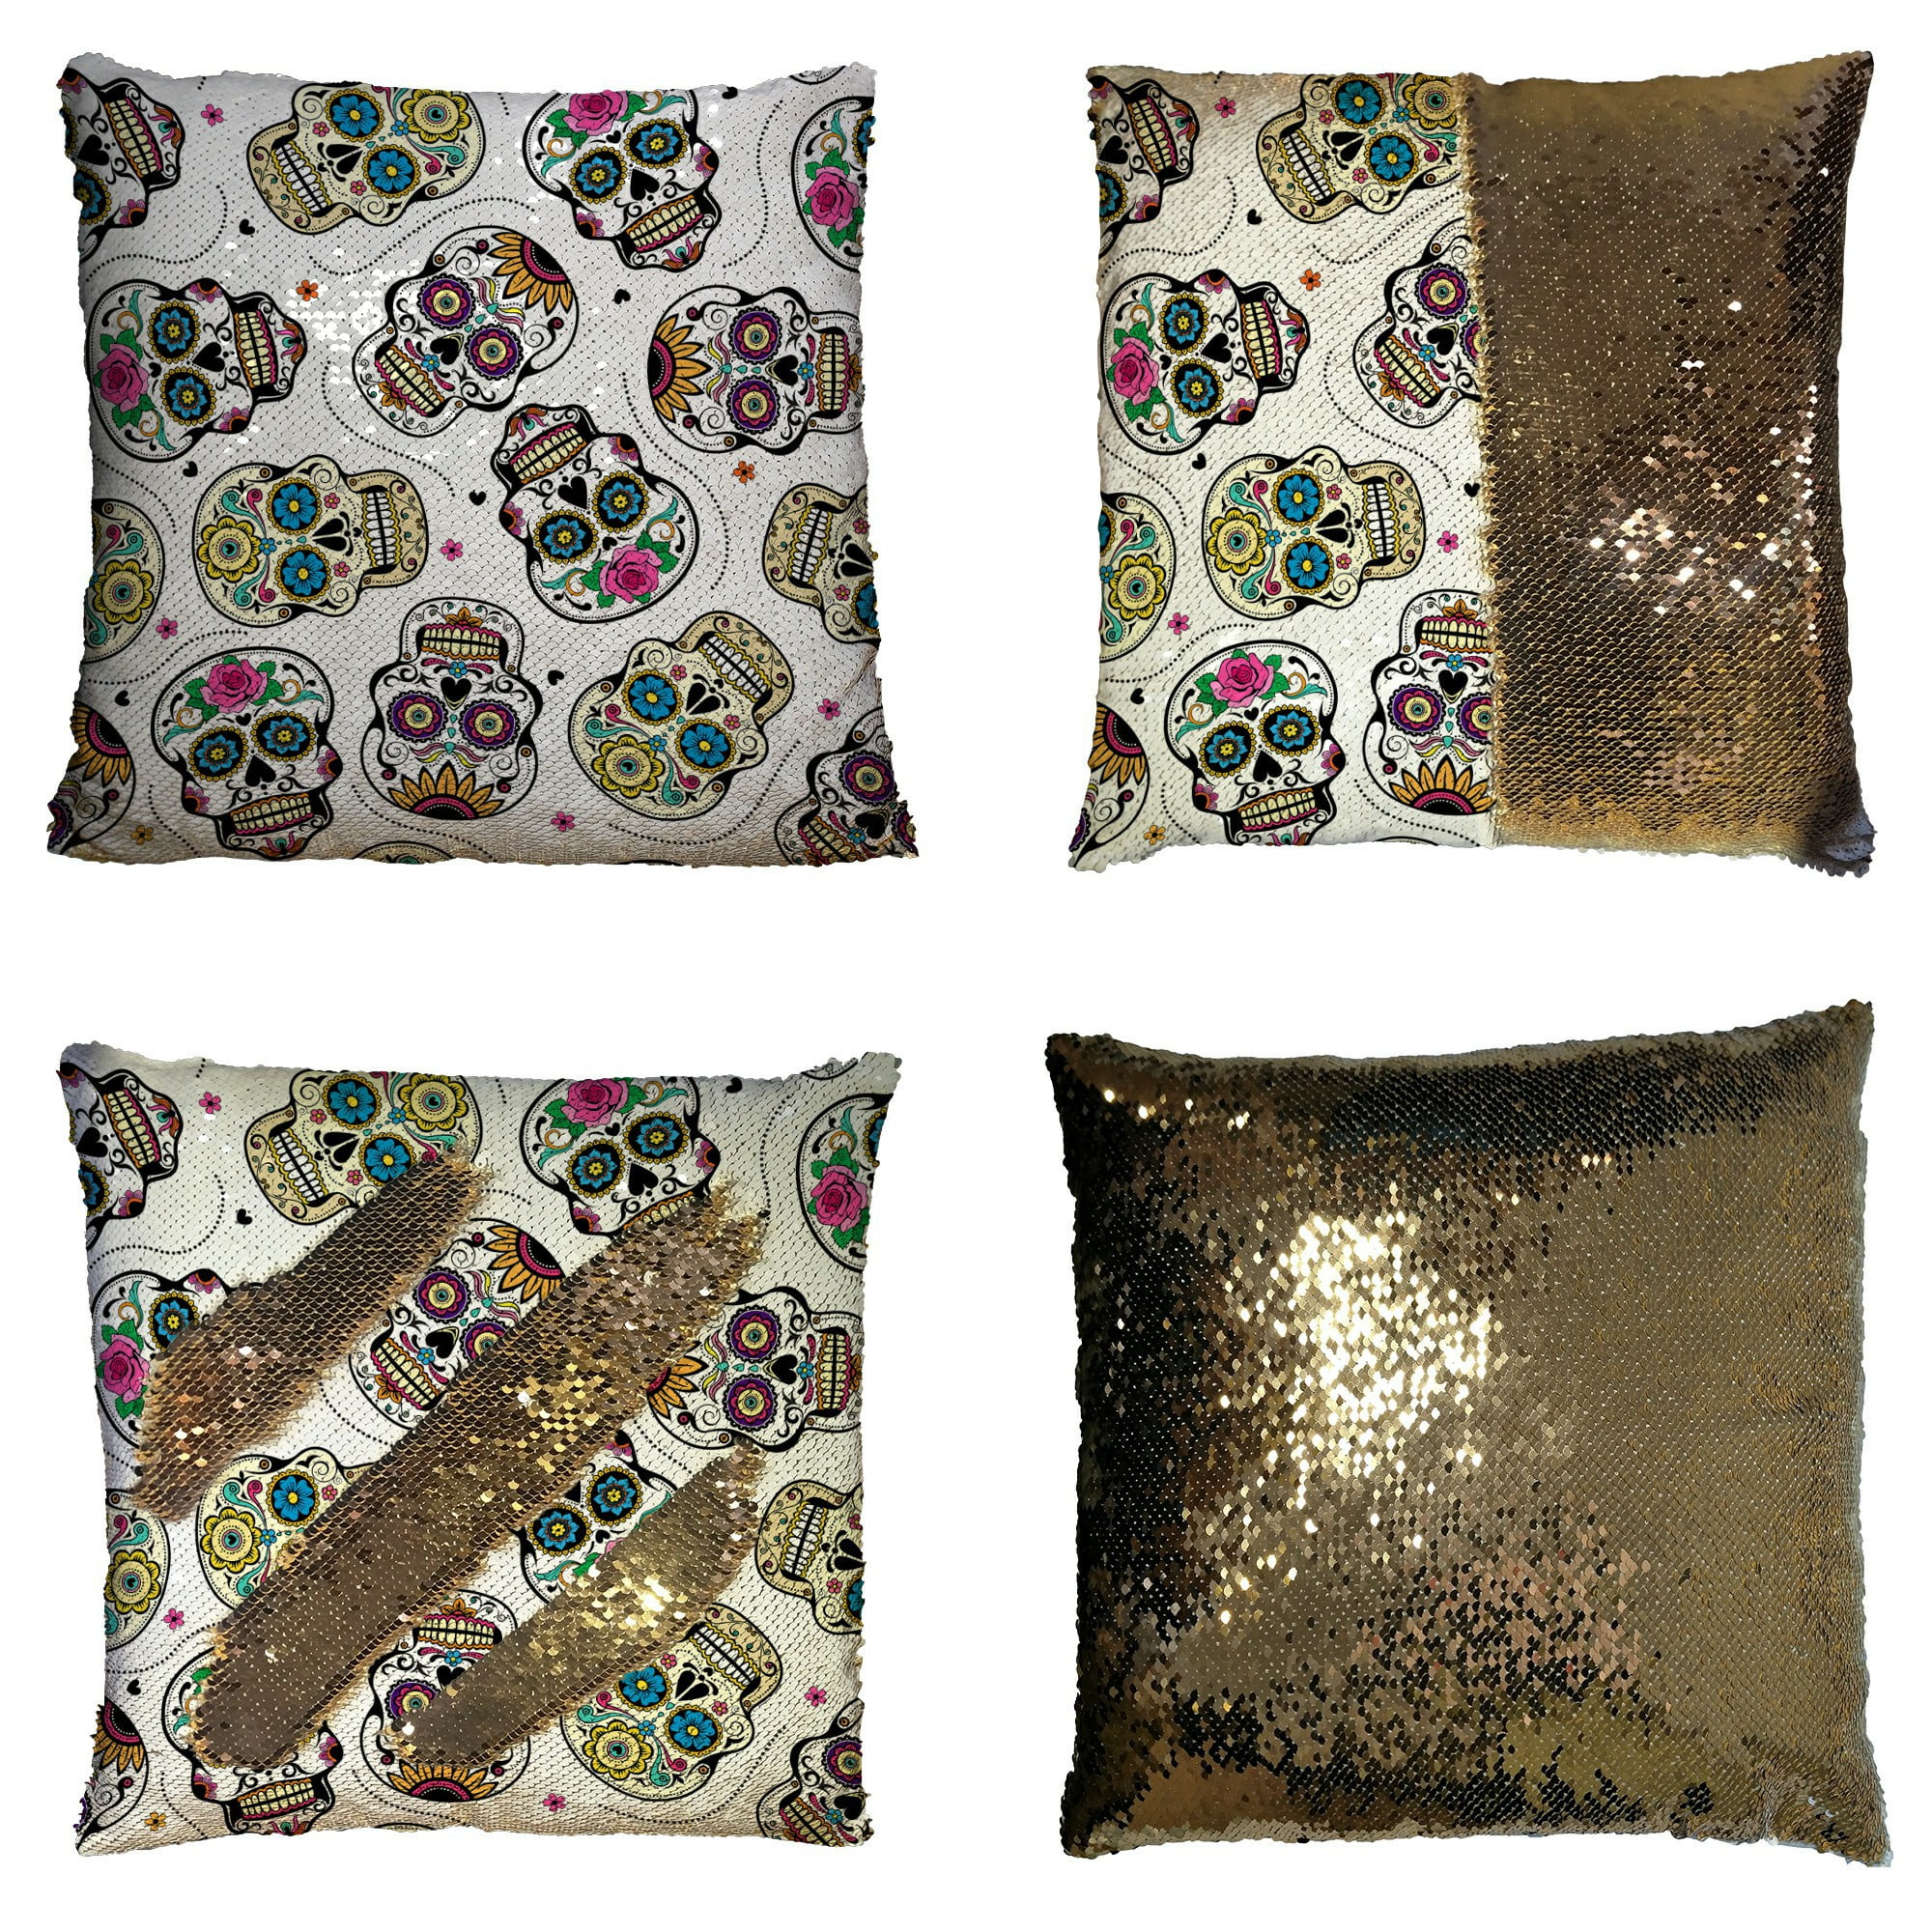 RM3301 8" Candy Skull Pillow 4 Color Options 